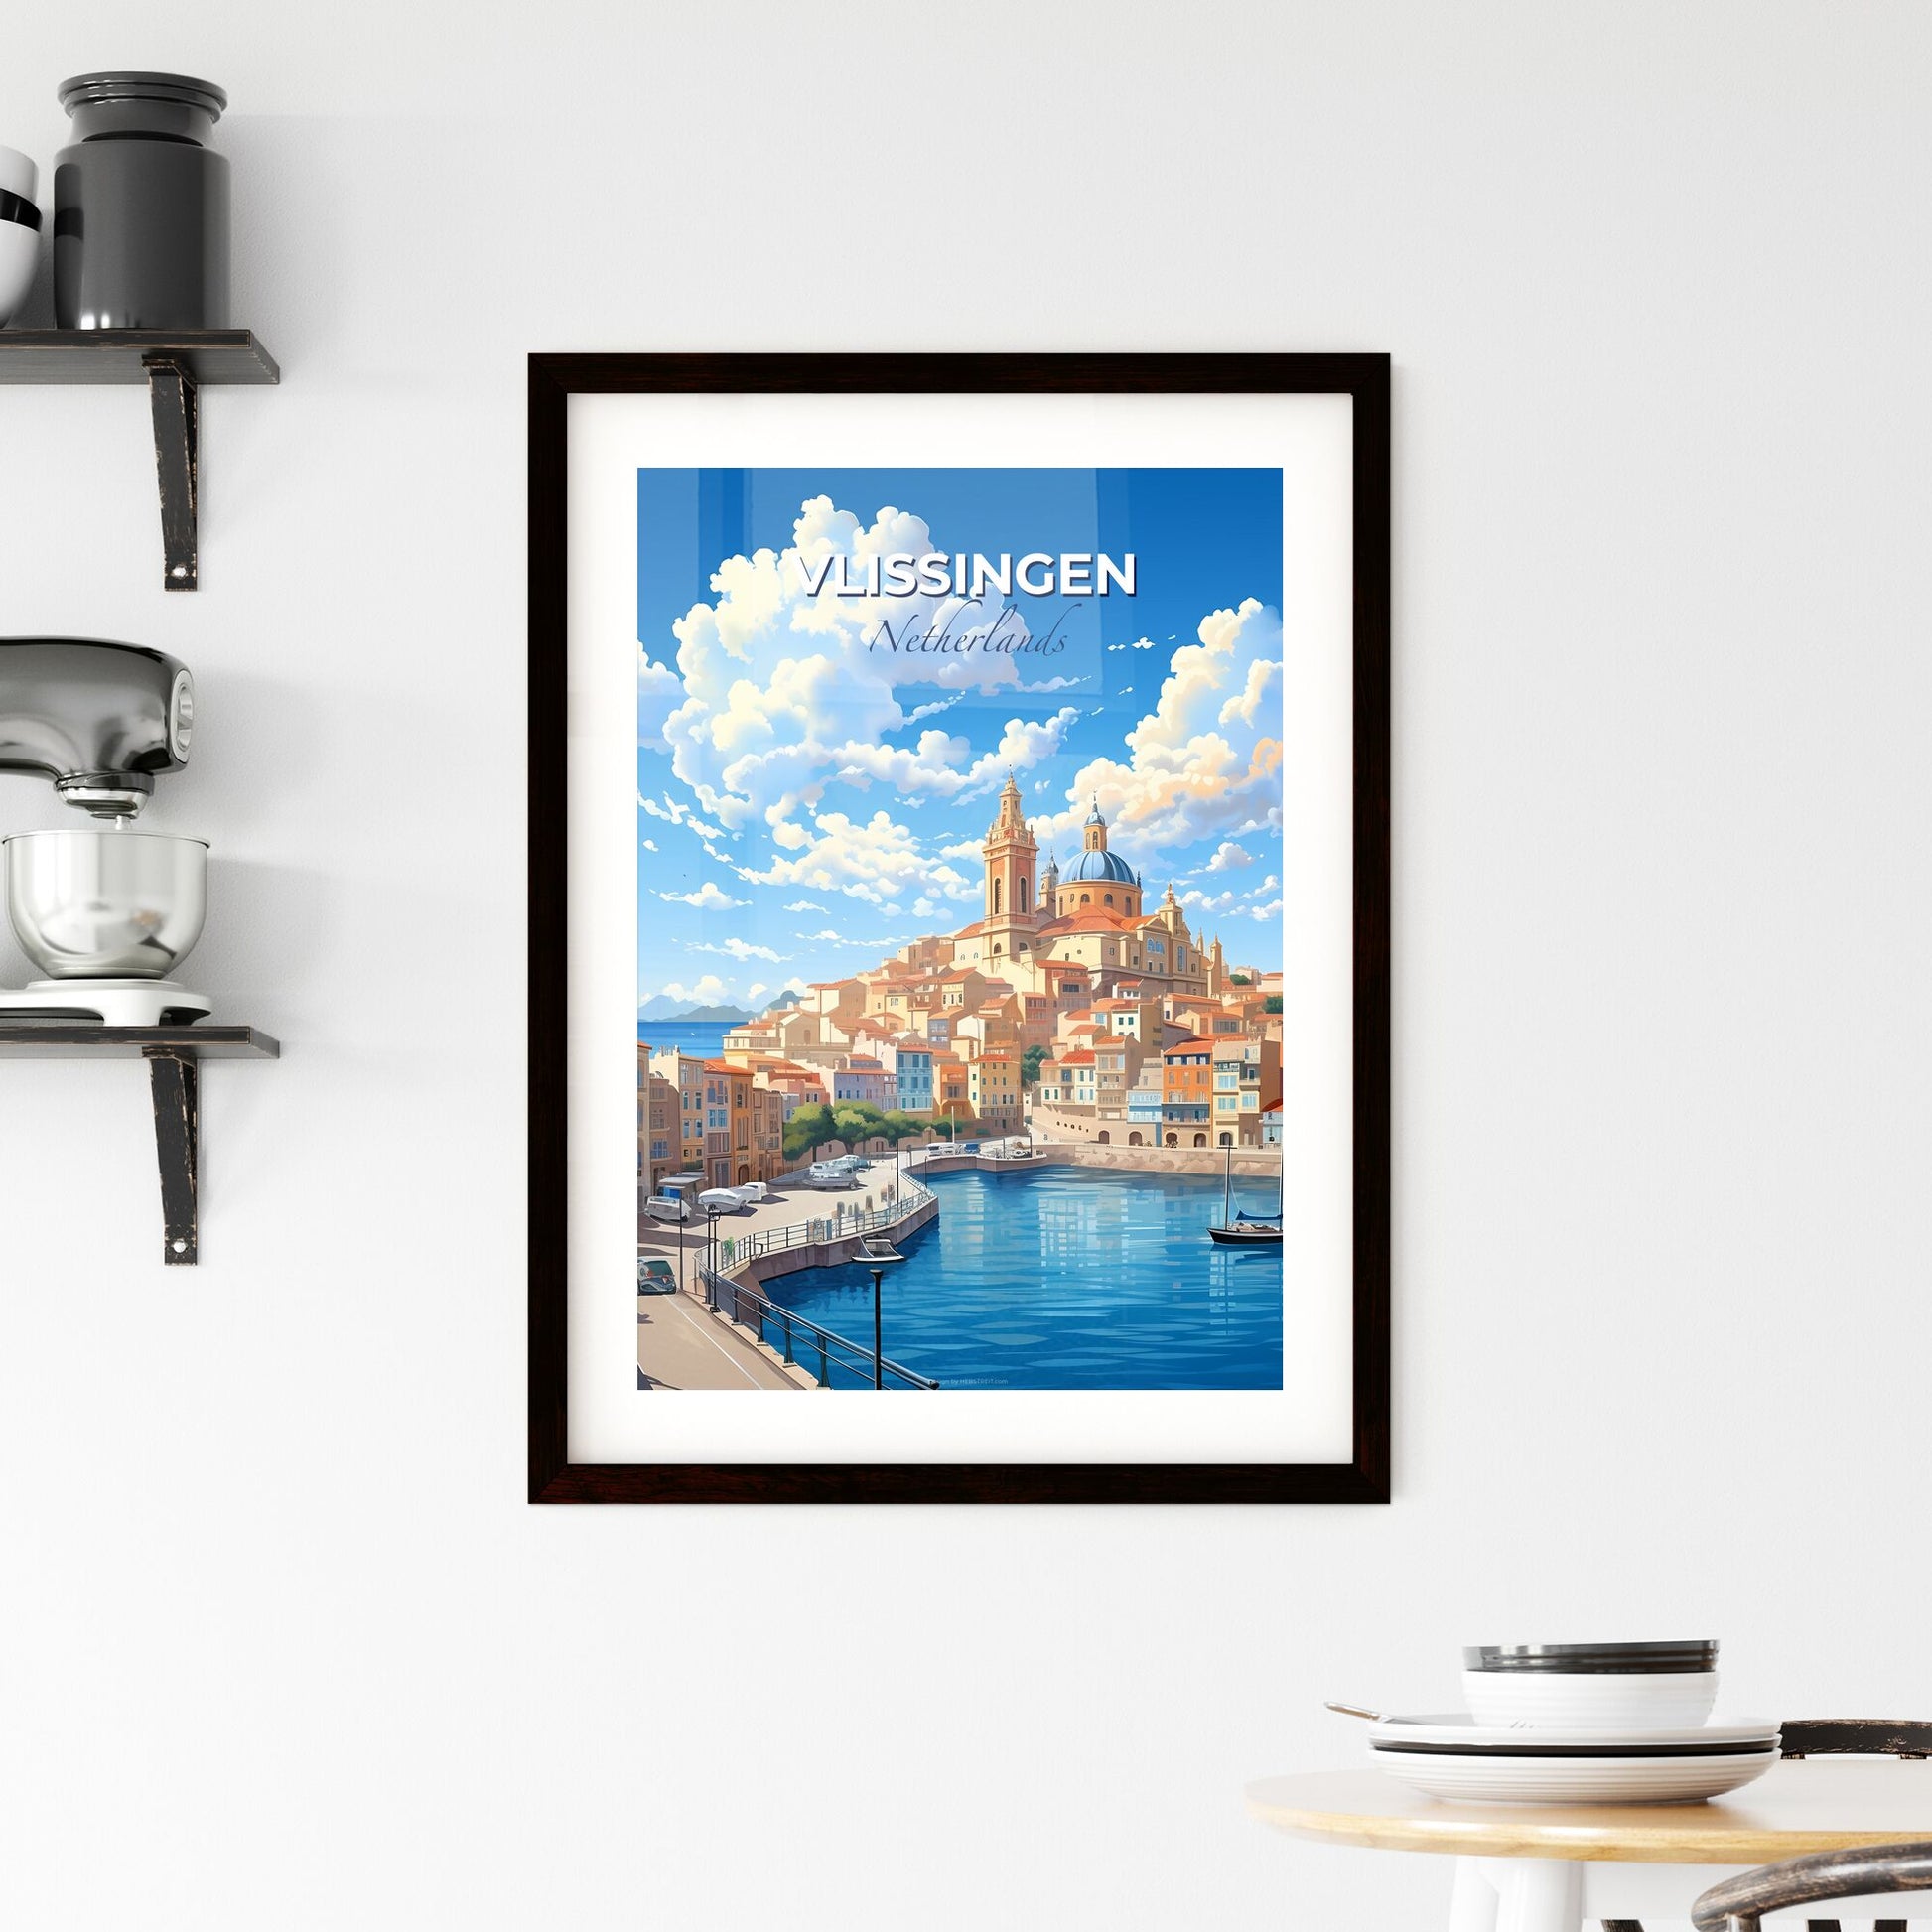 Vlissingen, Netherlands, A Poster of a city by the water Default Title